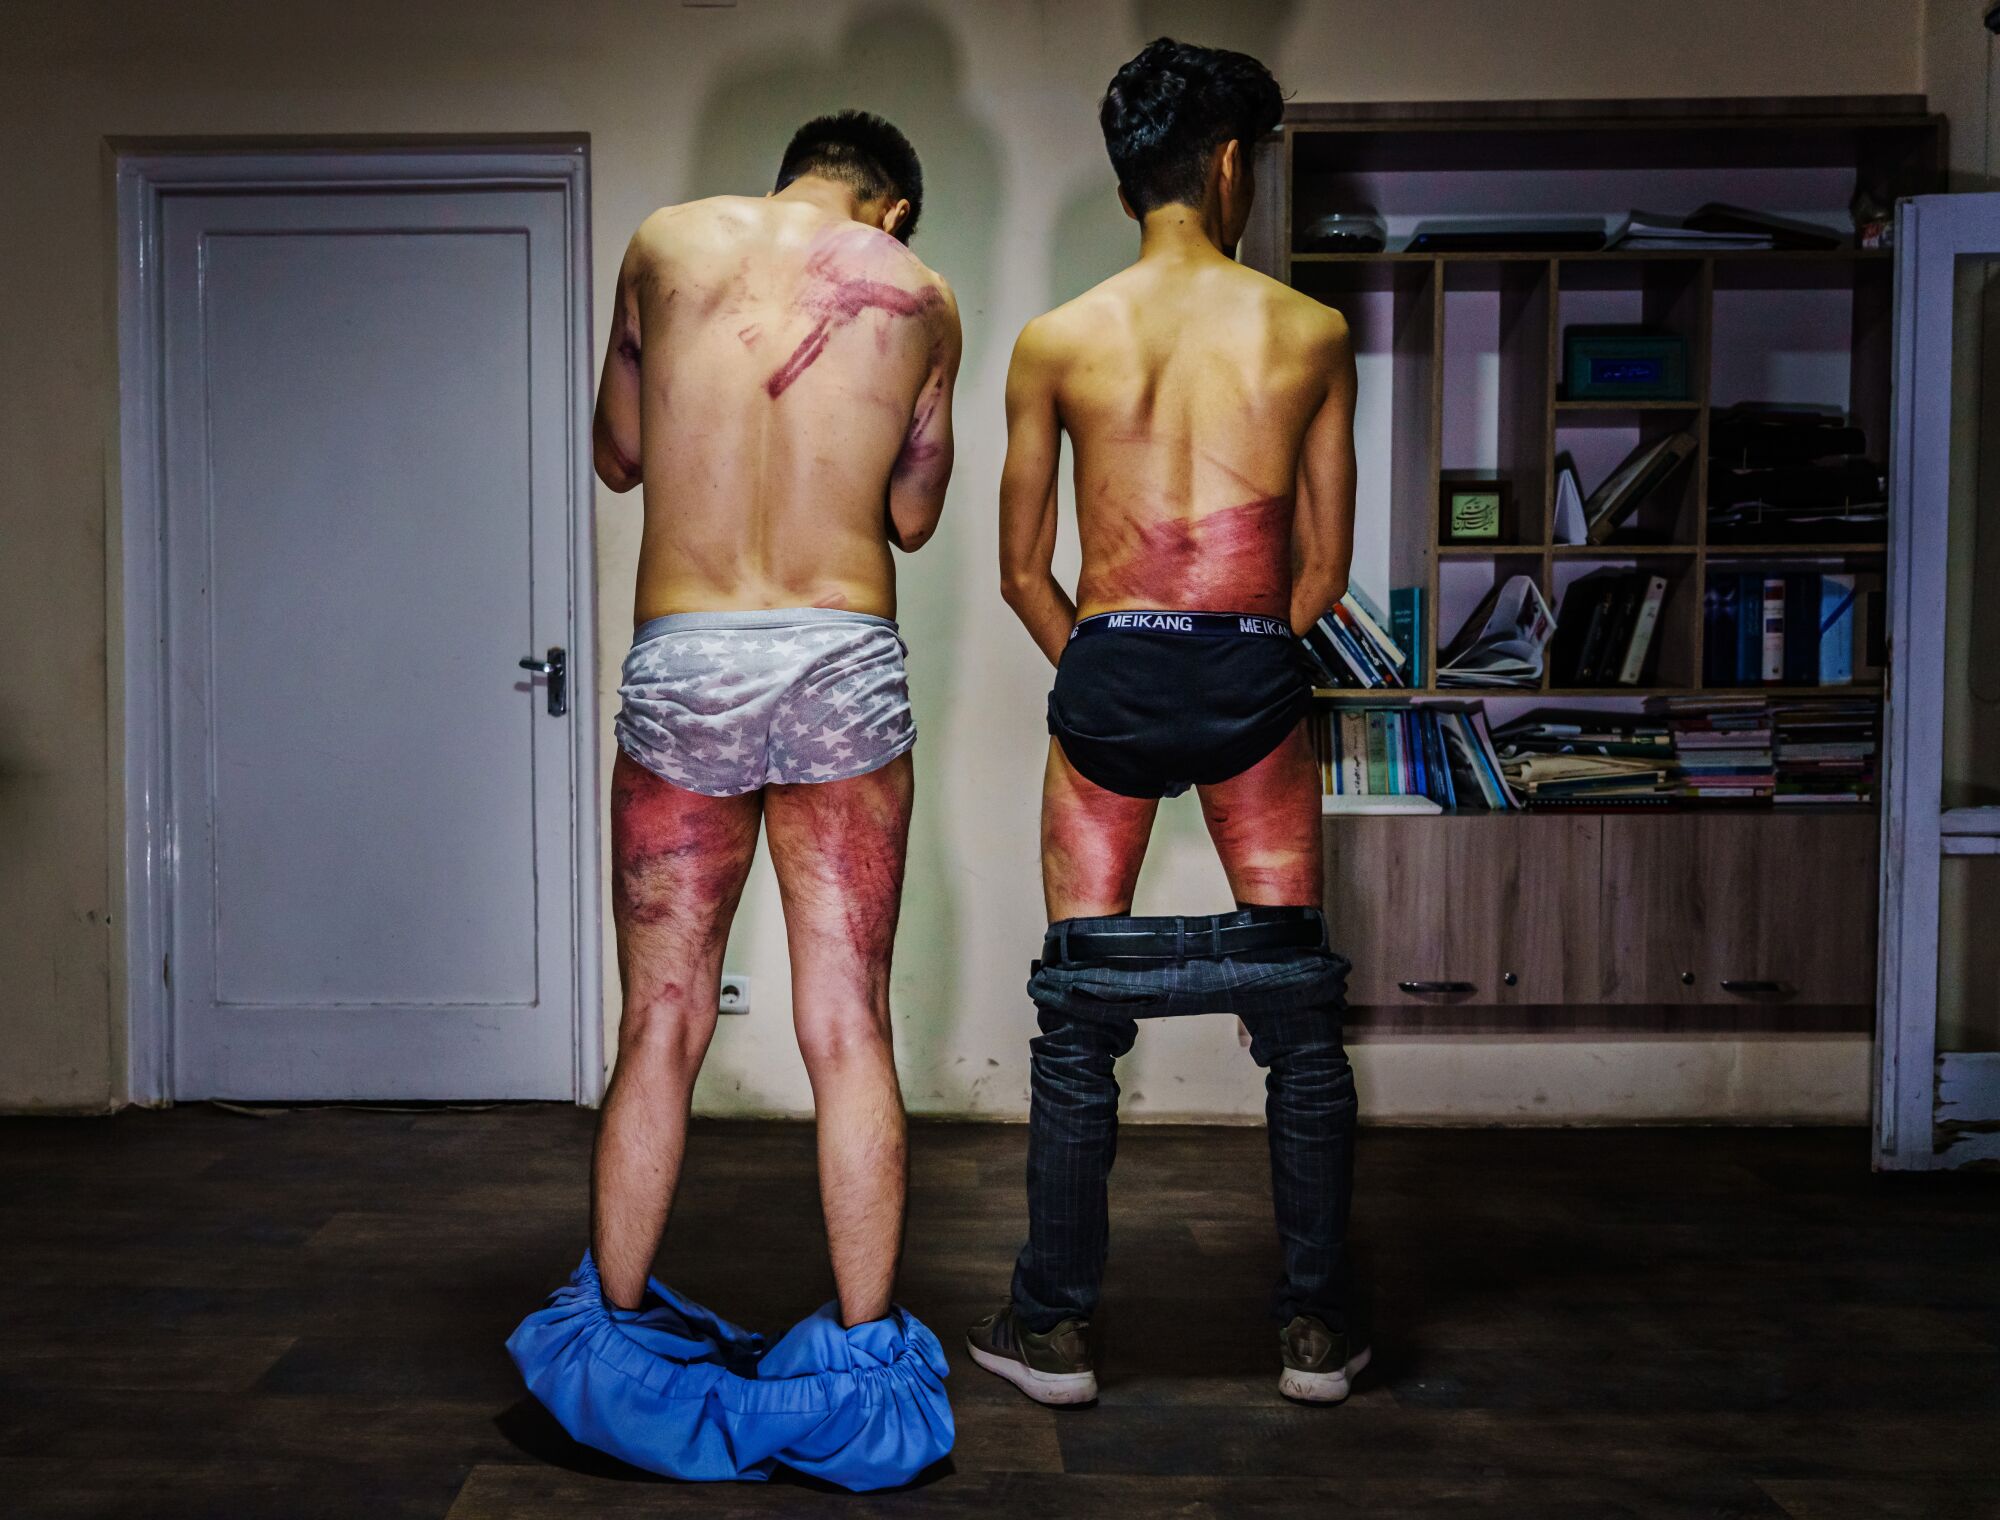 Two men stand and show their backs and legs covered in wounds.